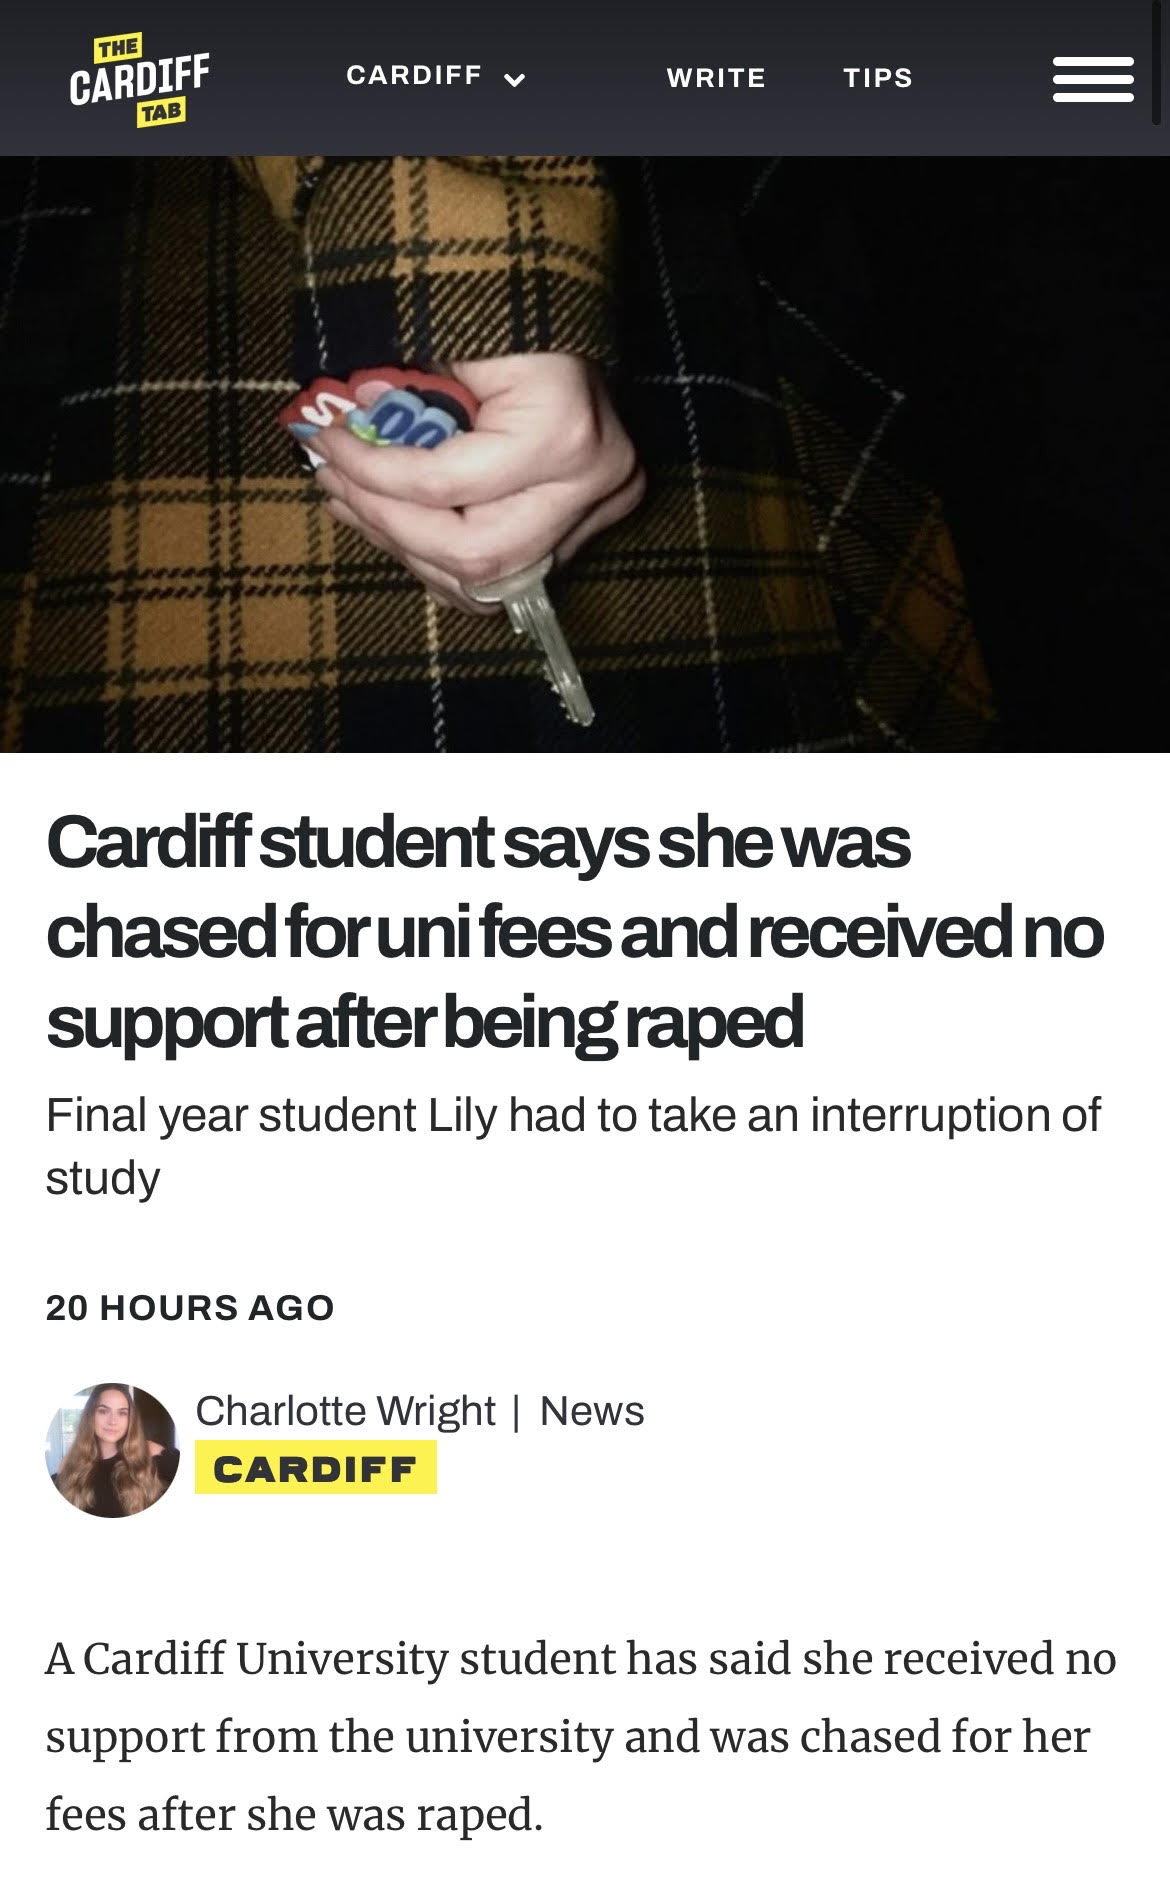 CARDIFF CARDIFF + WRITE ULE —

 

Cardiff student says shewas
chased forunifees and received no

support afterbeing raped

Final year student Lily had to take an interruption of
study

20 HOURS AGO

Charlotte Wright | News
CARDIFF

A Cardiff University student has said she received no
support from the university and was chased for her

fees after she was raped.